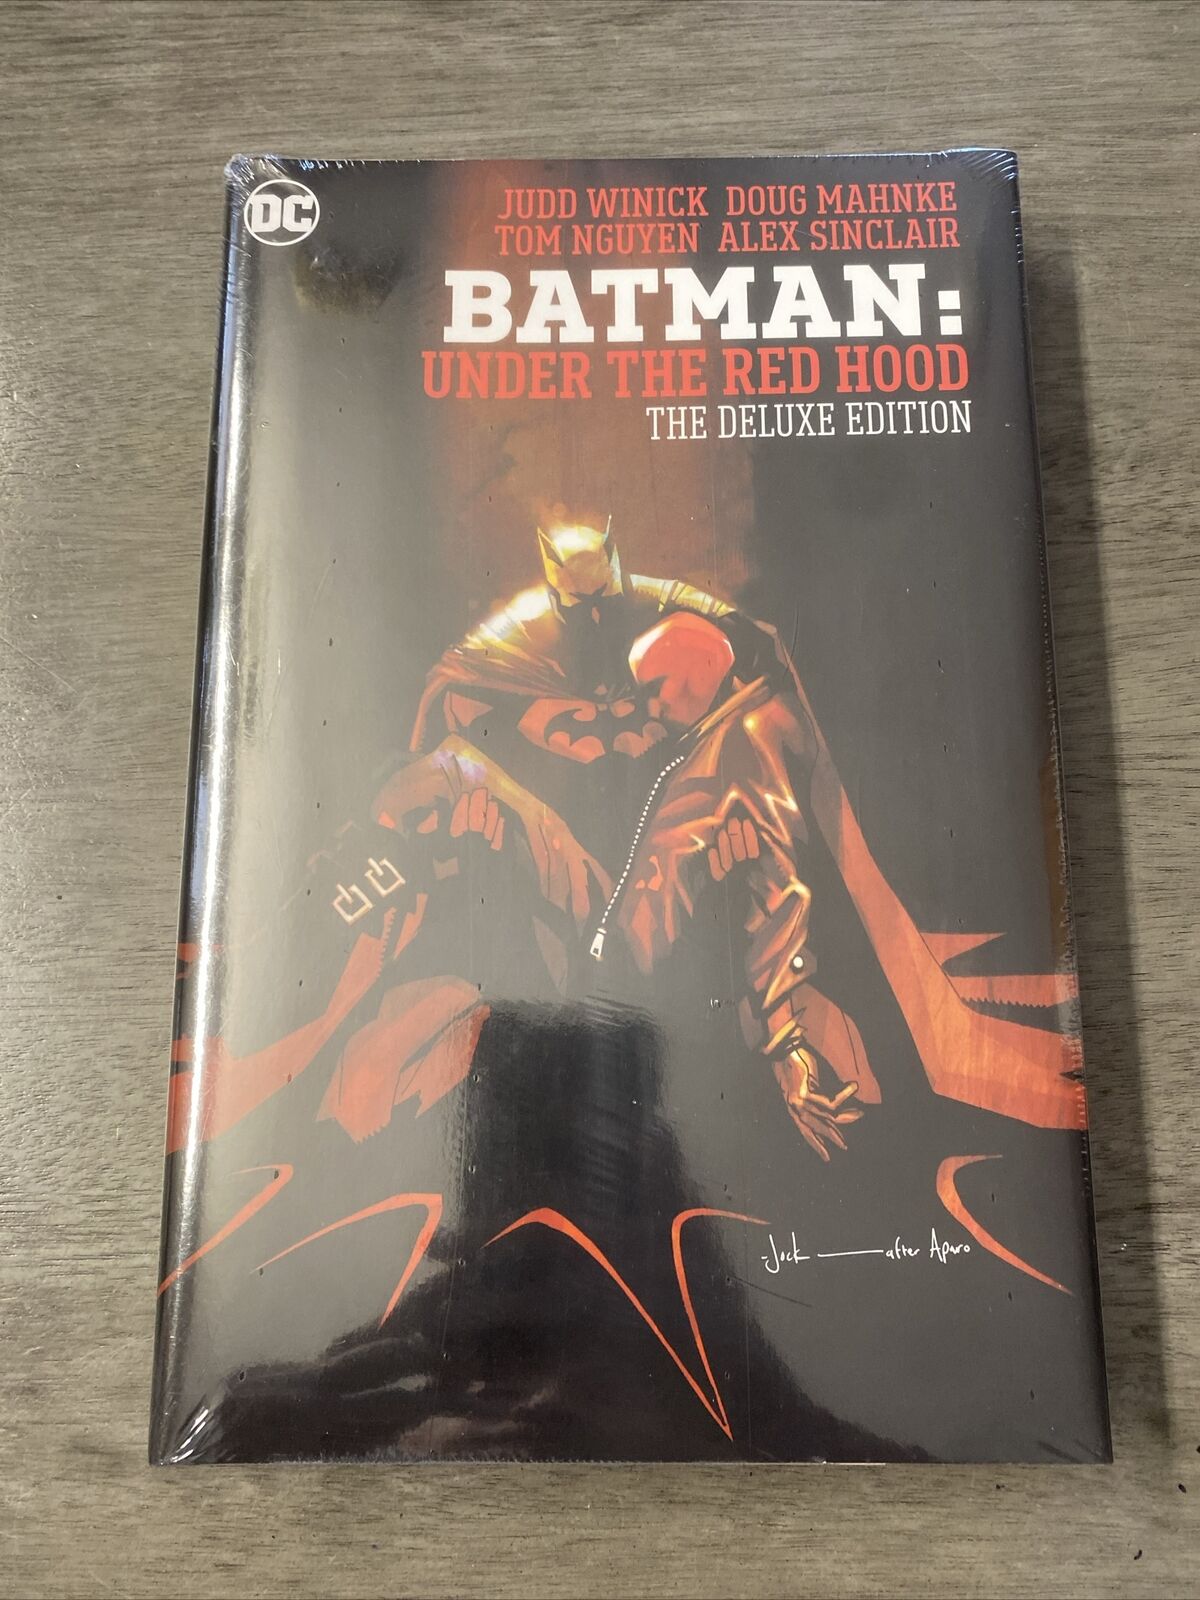 Batman: Under the Red Hood Deluxe Edition (DC Comics, Hardcover)